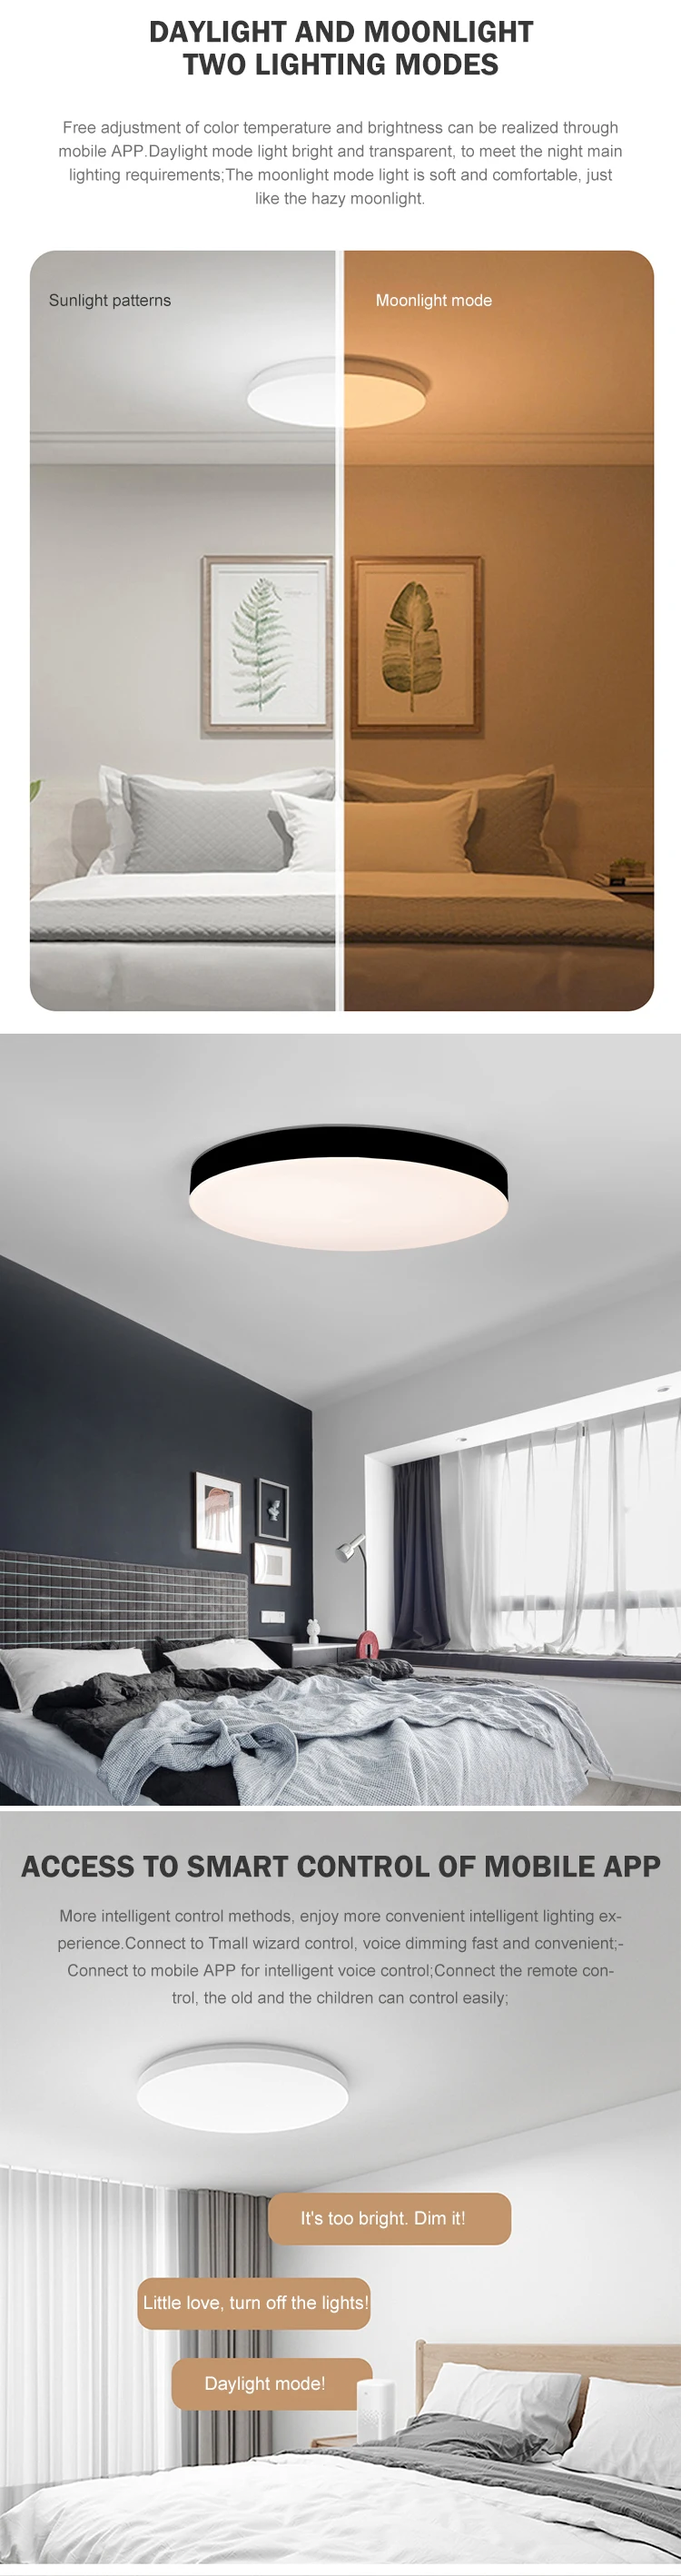 Bedroom exquisite surface mounted 30w 45w 60w Round led Ceiling lamp Light